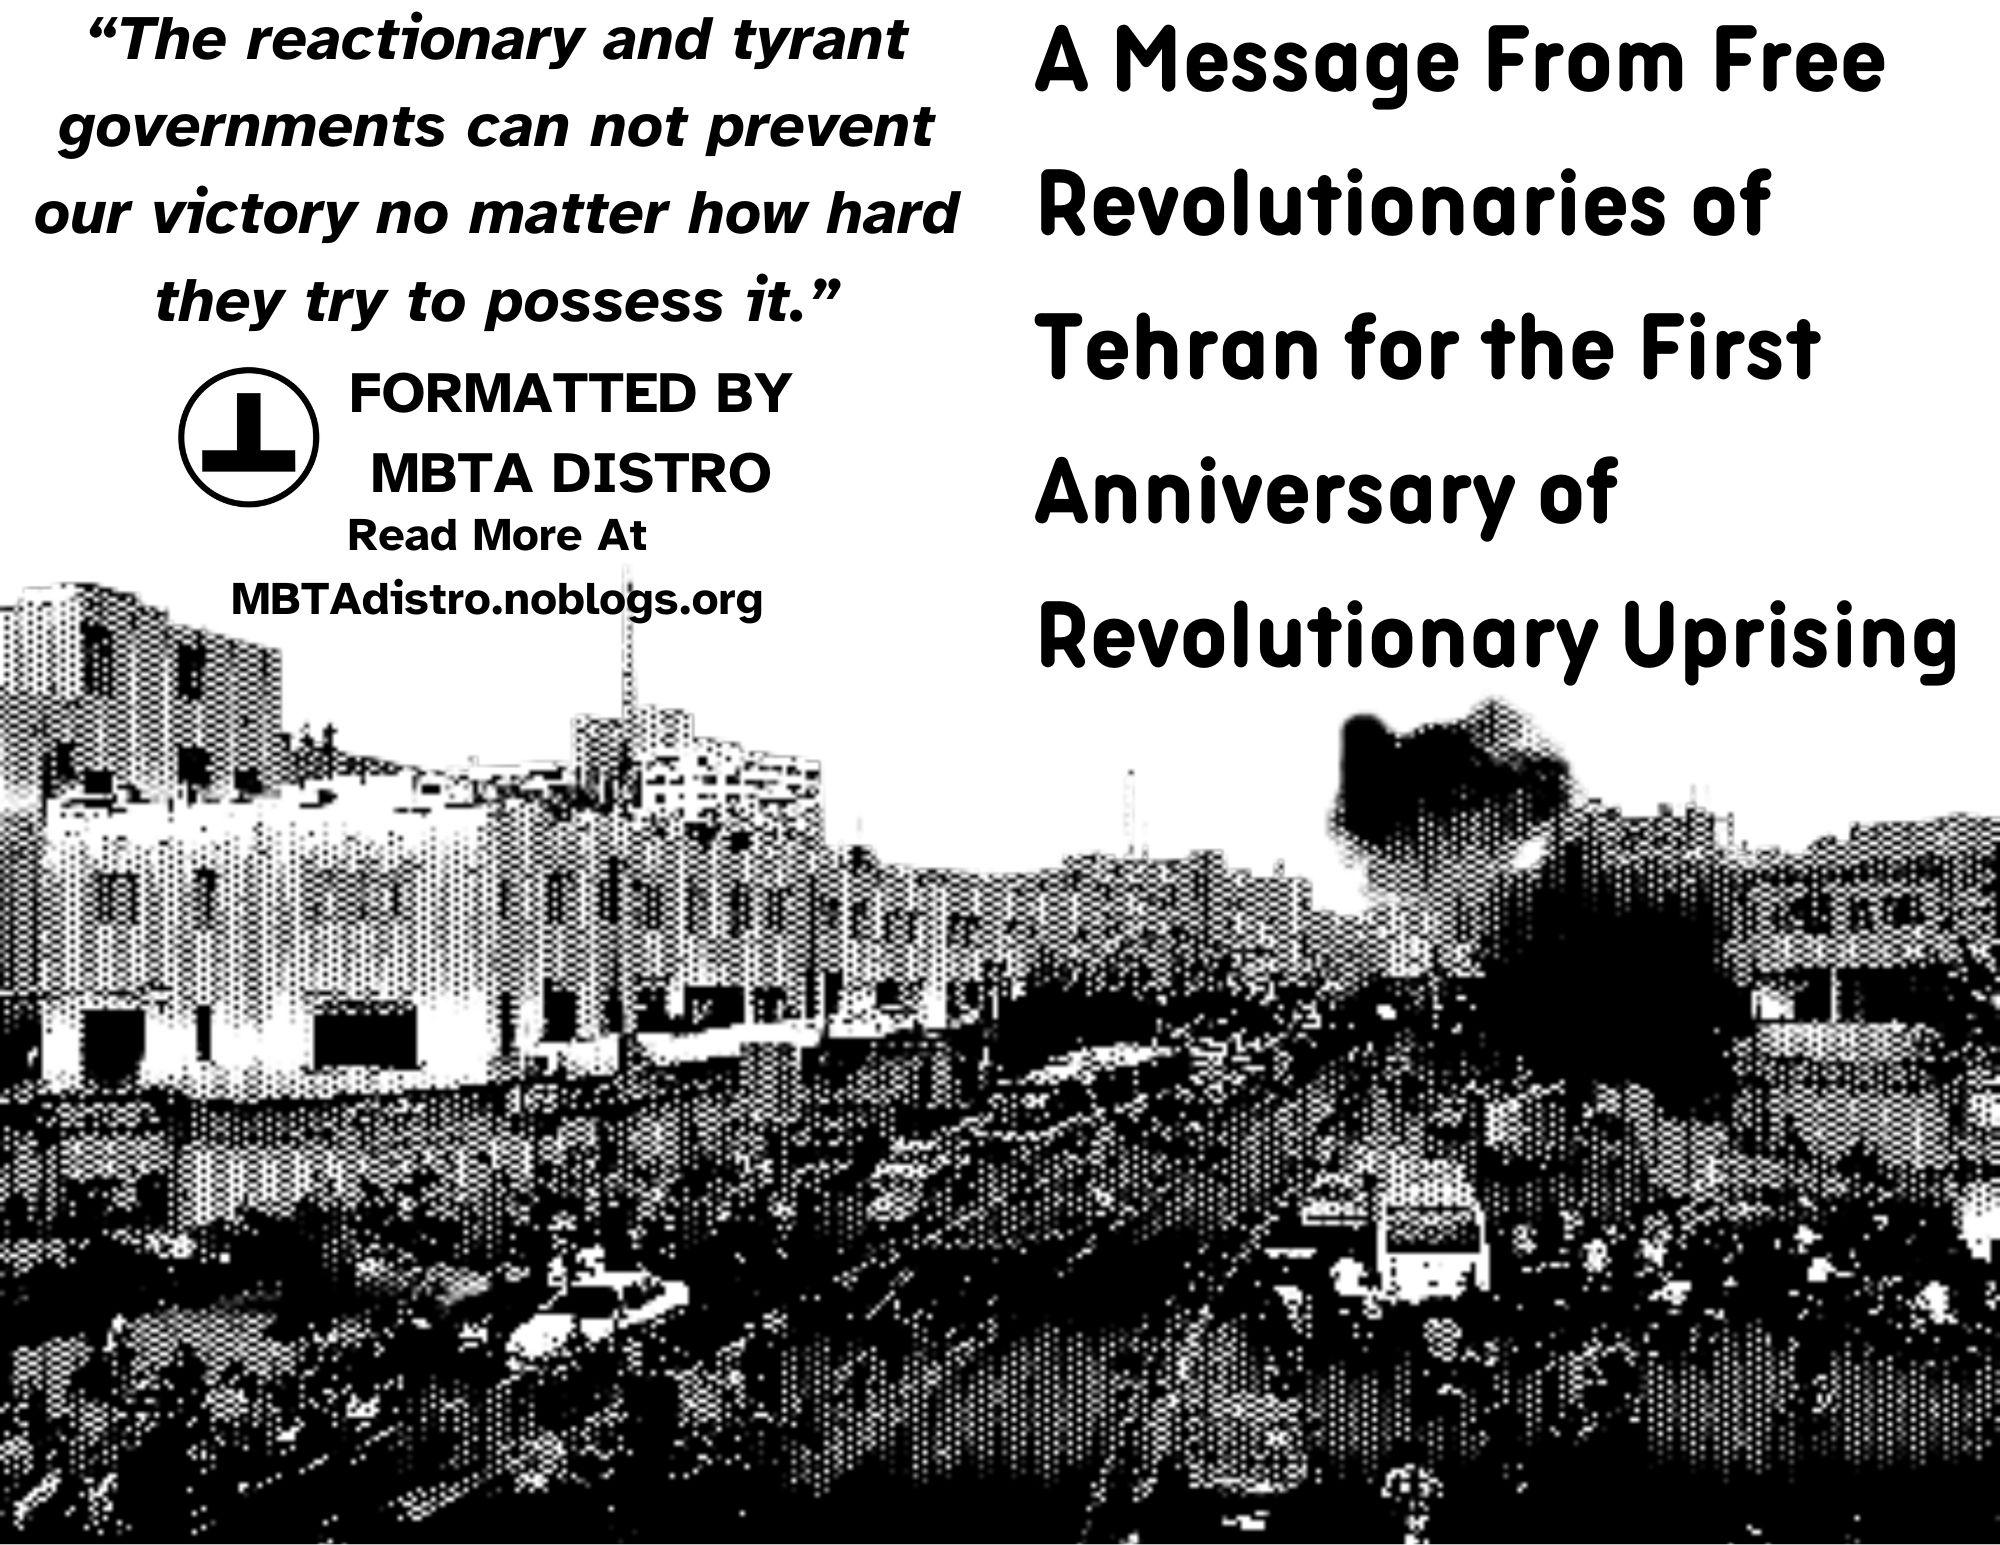 New Zine: Format of A Message From Free Revolutionaries of Tehran